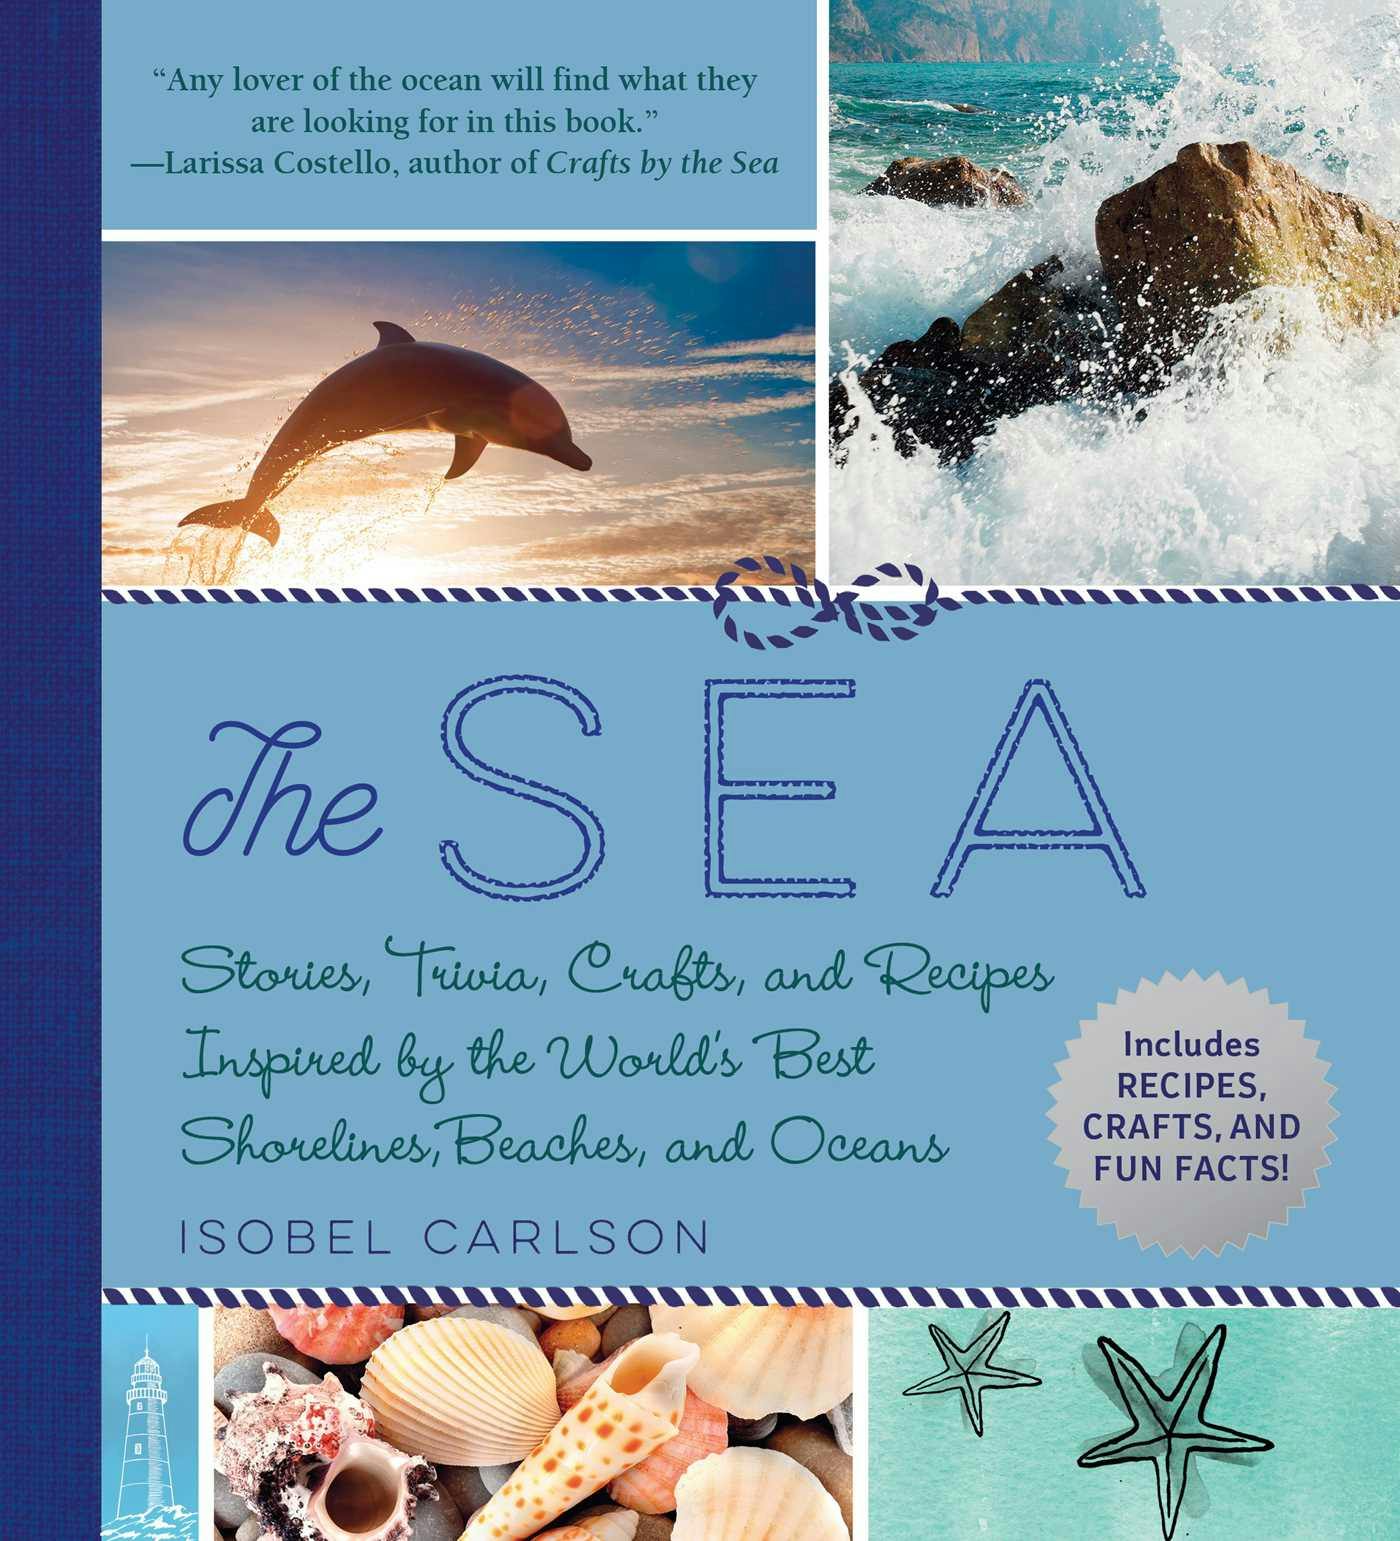 The Sea: Stories, Trivia, Crafts, and Recipes Inspired by the World's Best Shorelines, Beaches, and Oceans - Isobel Carlson